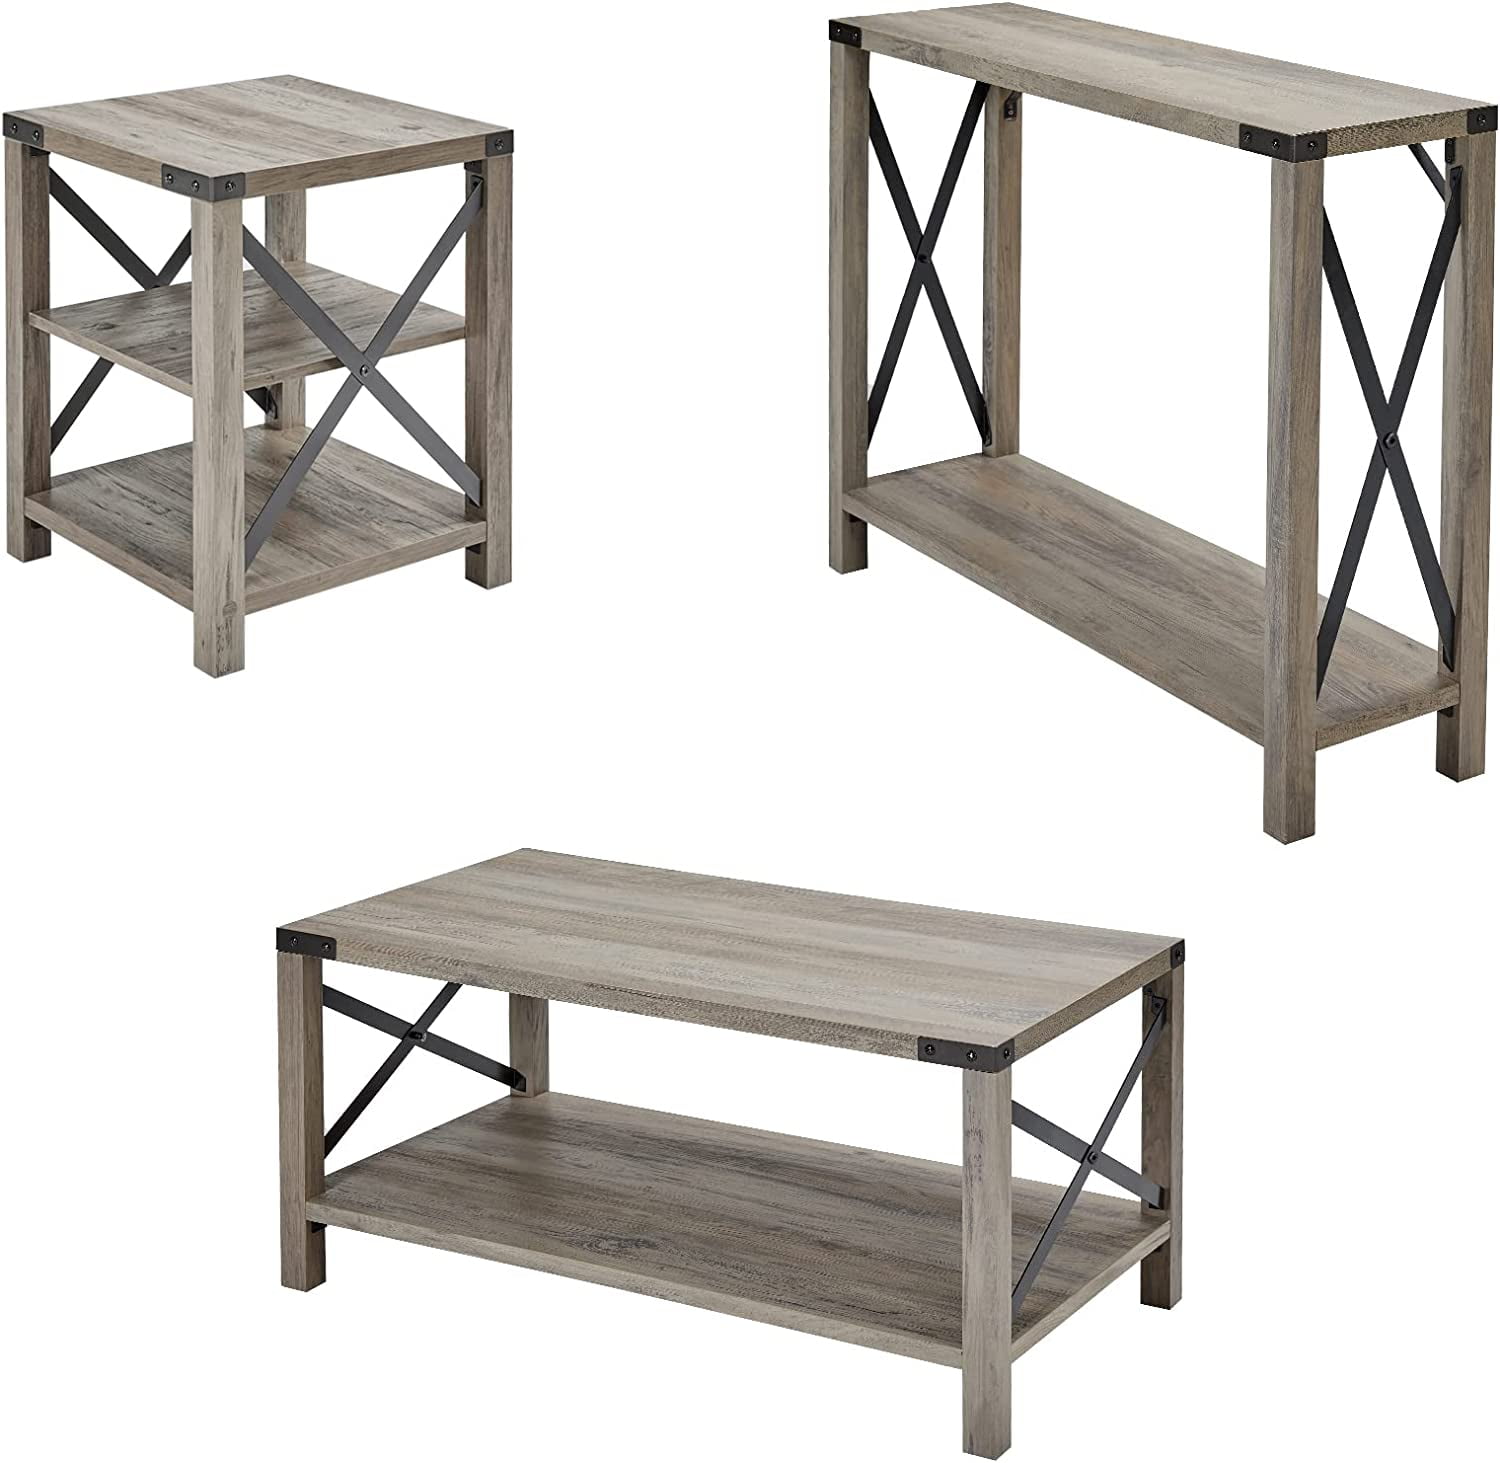 Amerlife 3-Piece Industrial Farmhouse Table Set - Includes Coffee Table ...